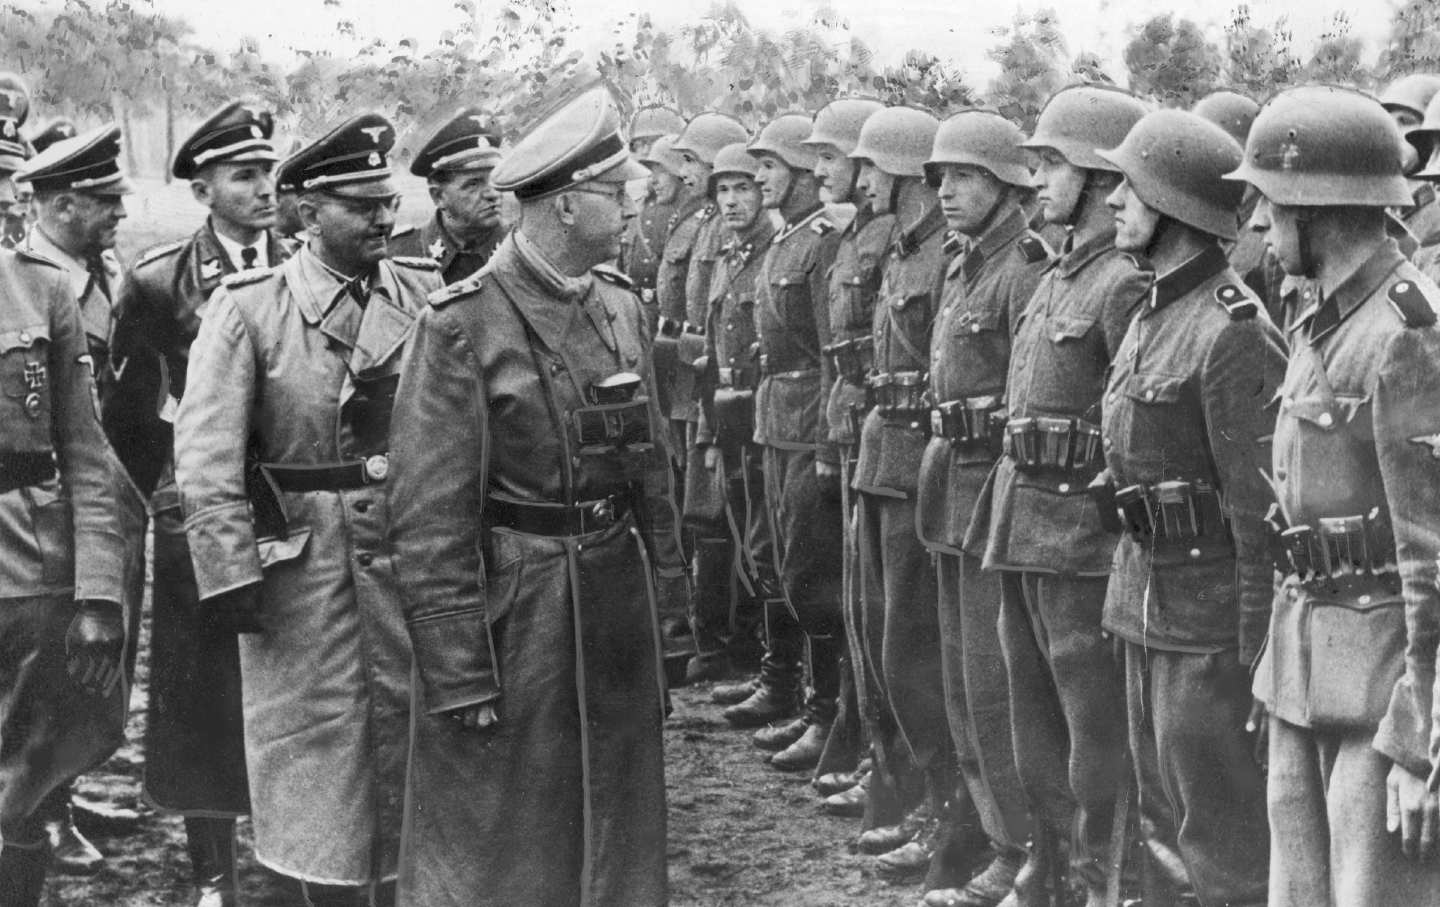 Heinrich Himmler inspecting the Galicia Division in May 1944. Otto Wächter is in the background.